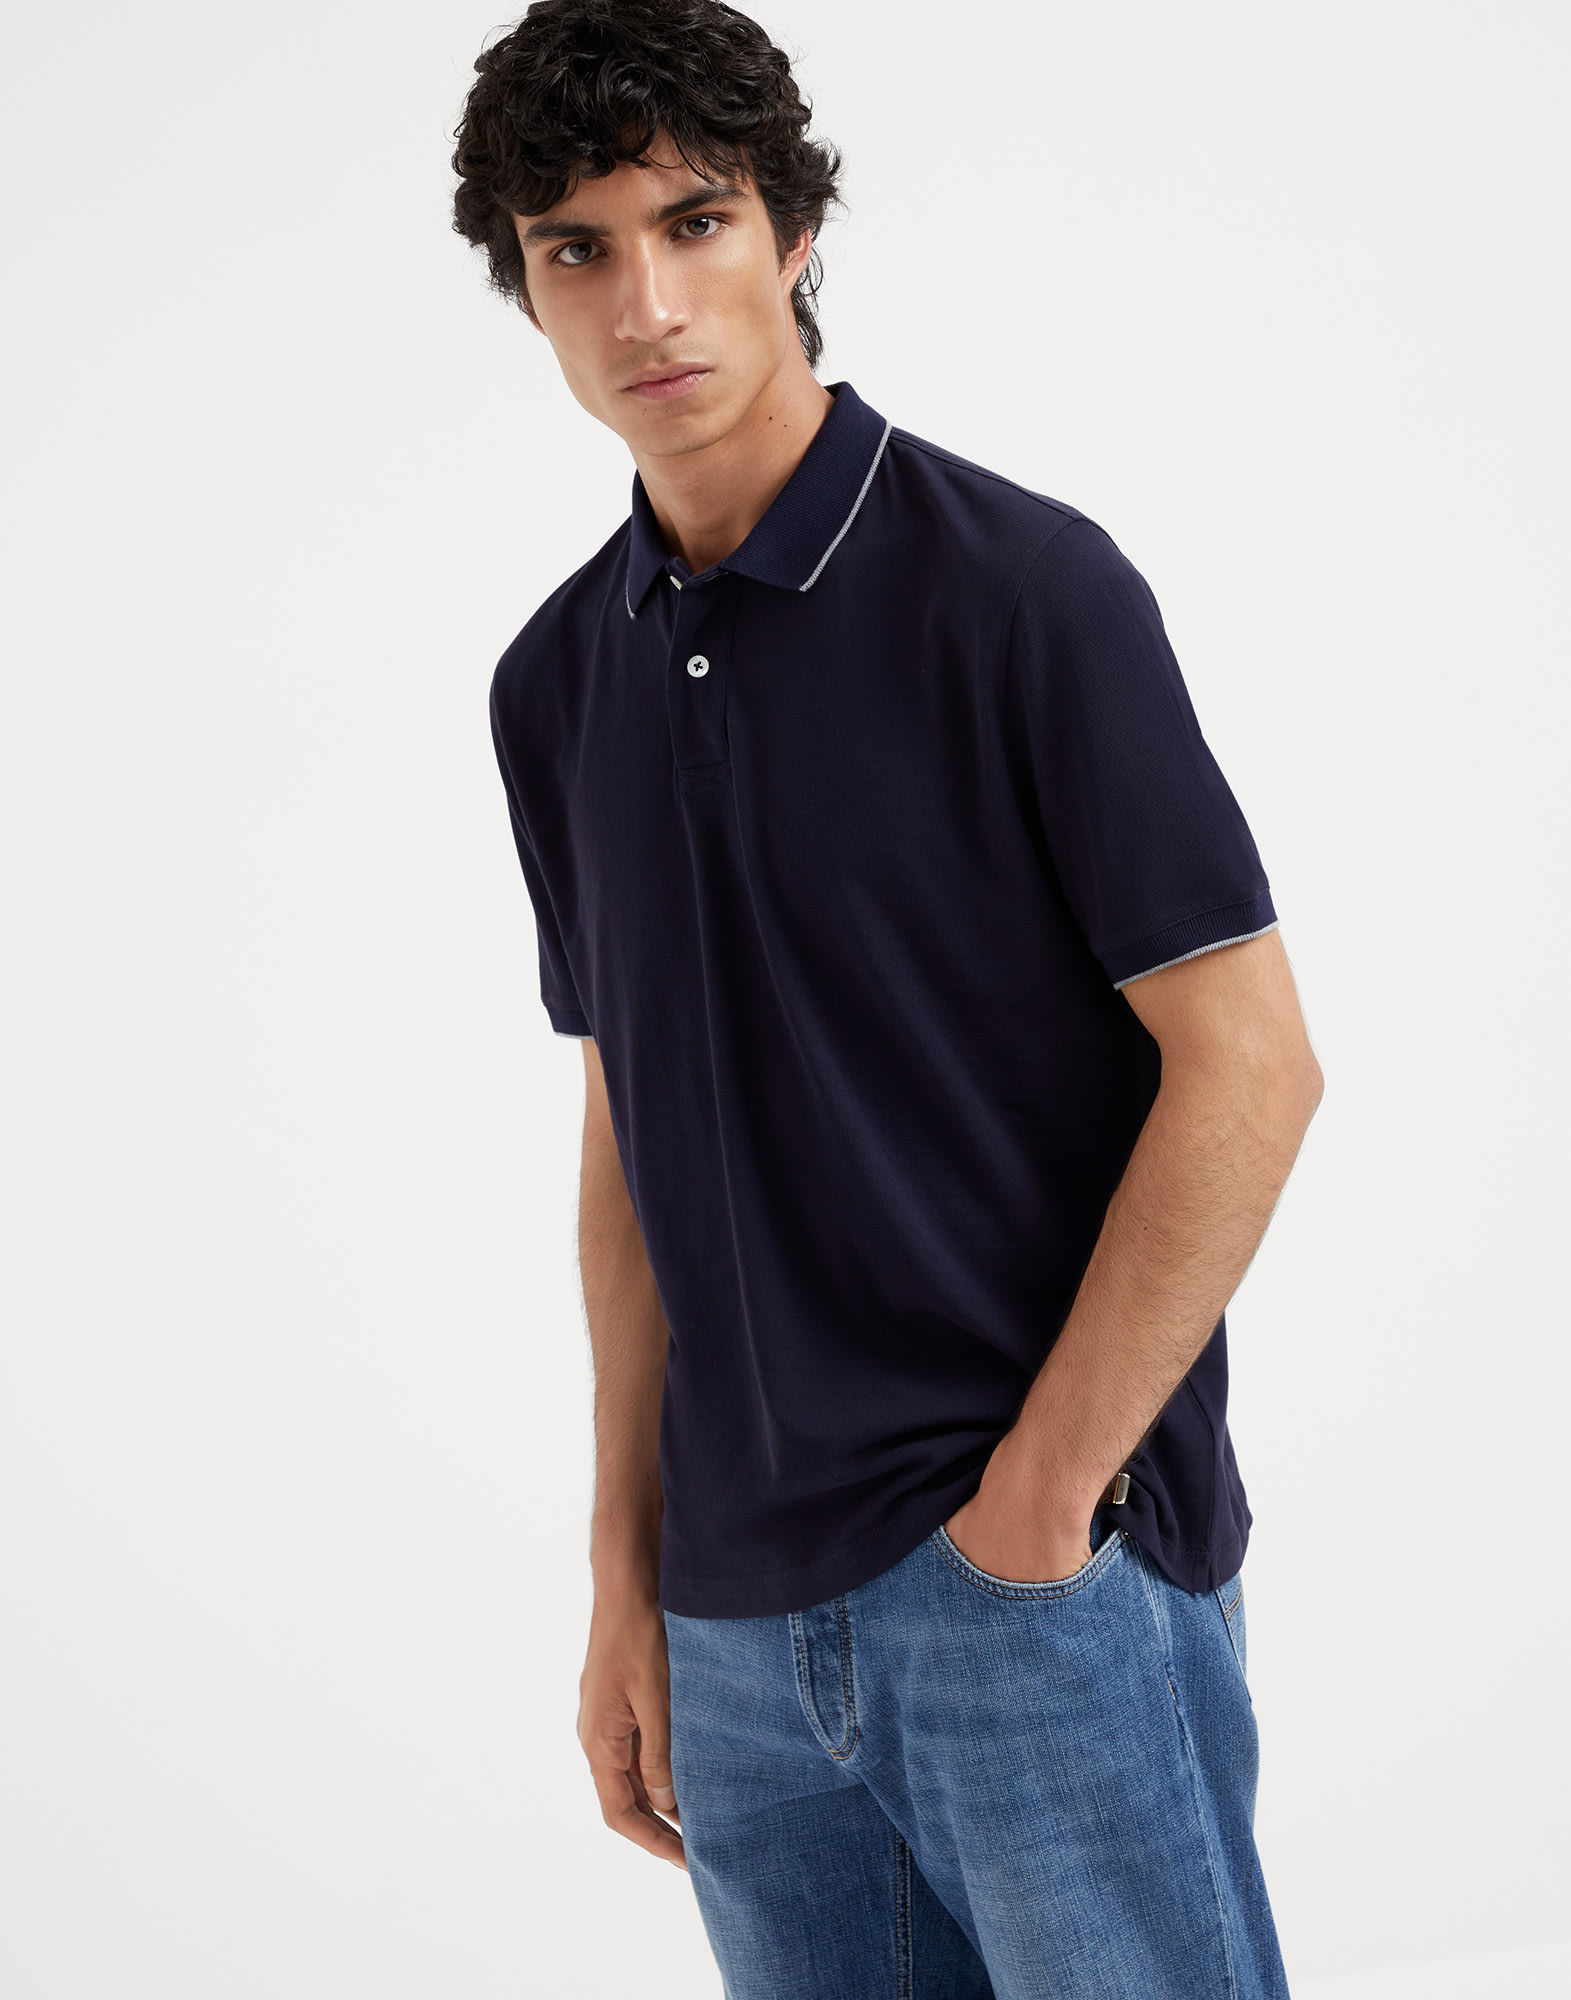 Polo Shirt - Front view